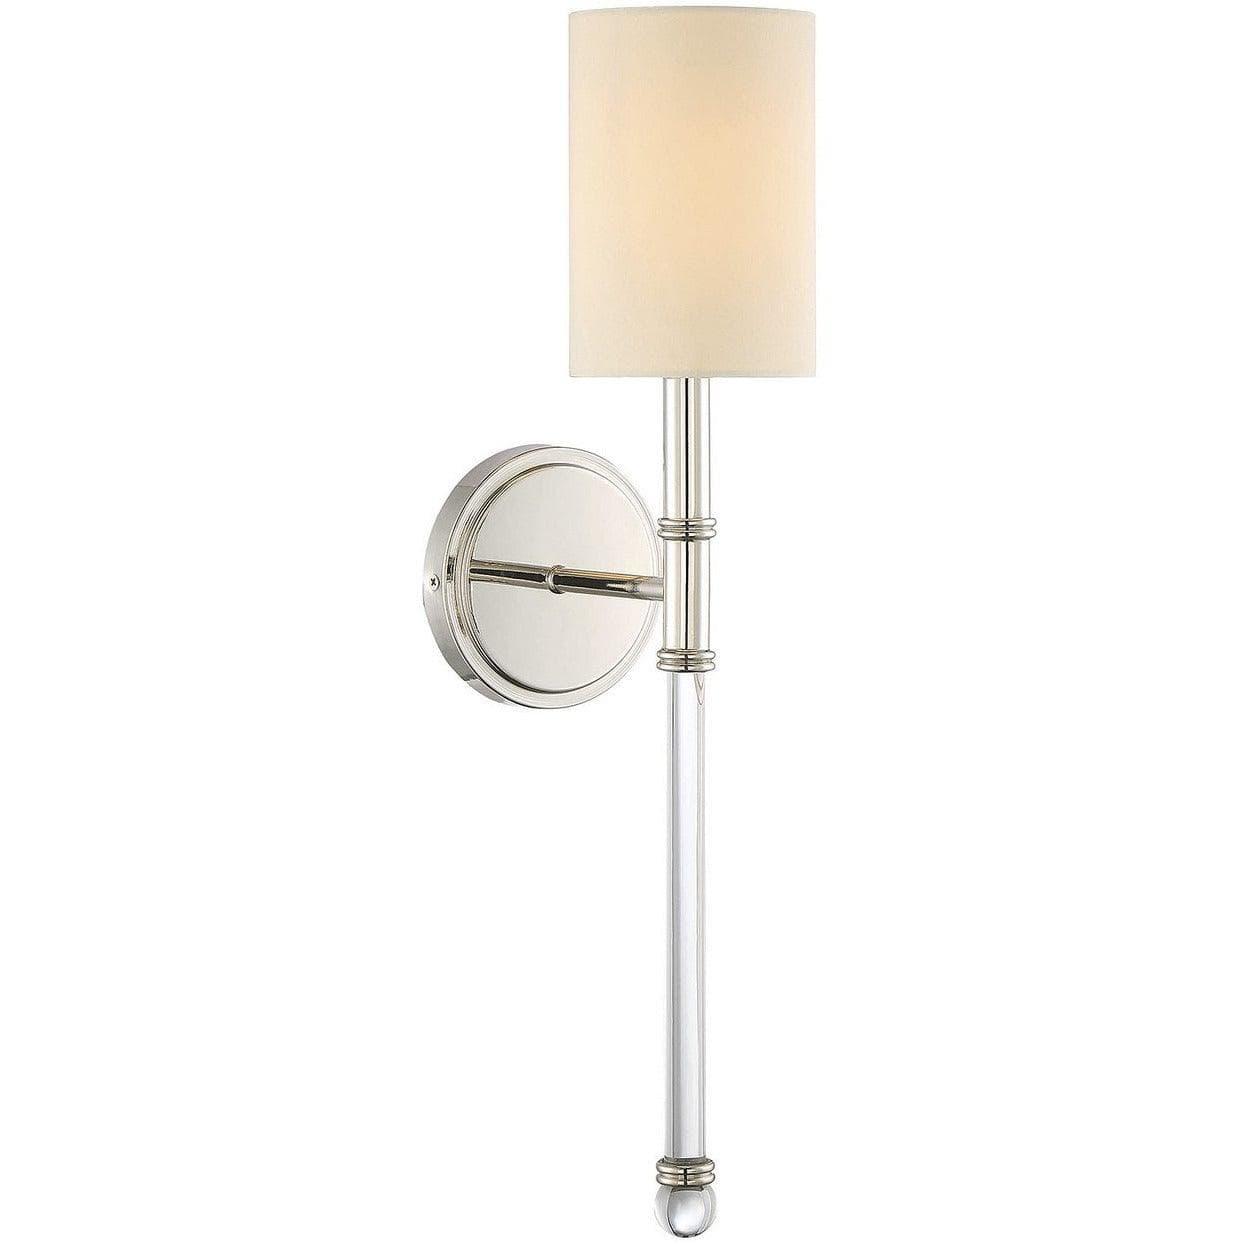 Savoy House - Fremont One Light Wall Sconce - 9-101-1-109 | Montreal Lighting & Hardware